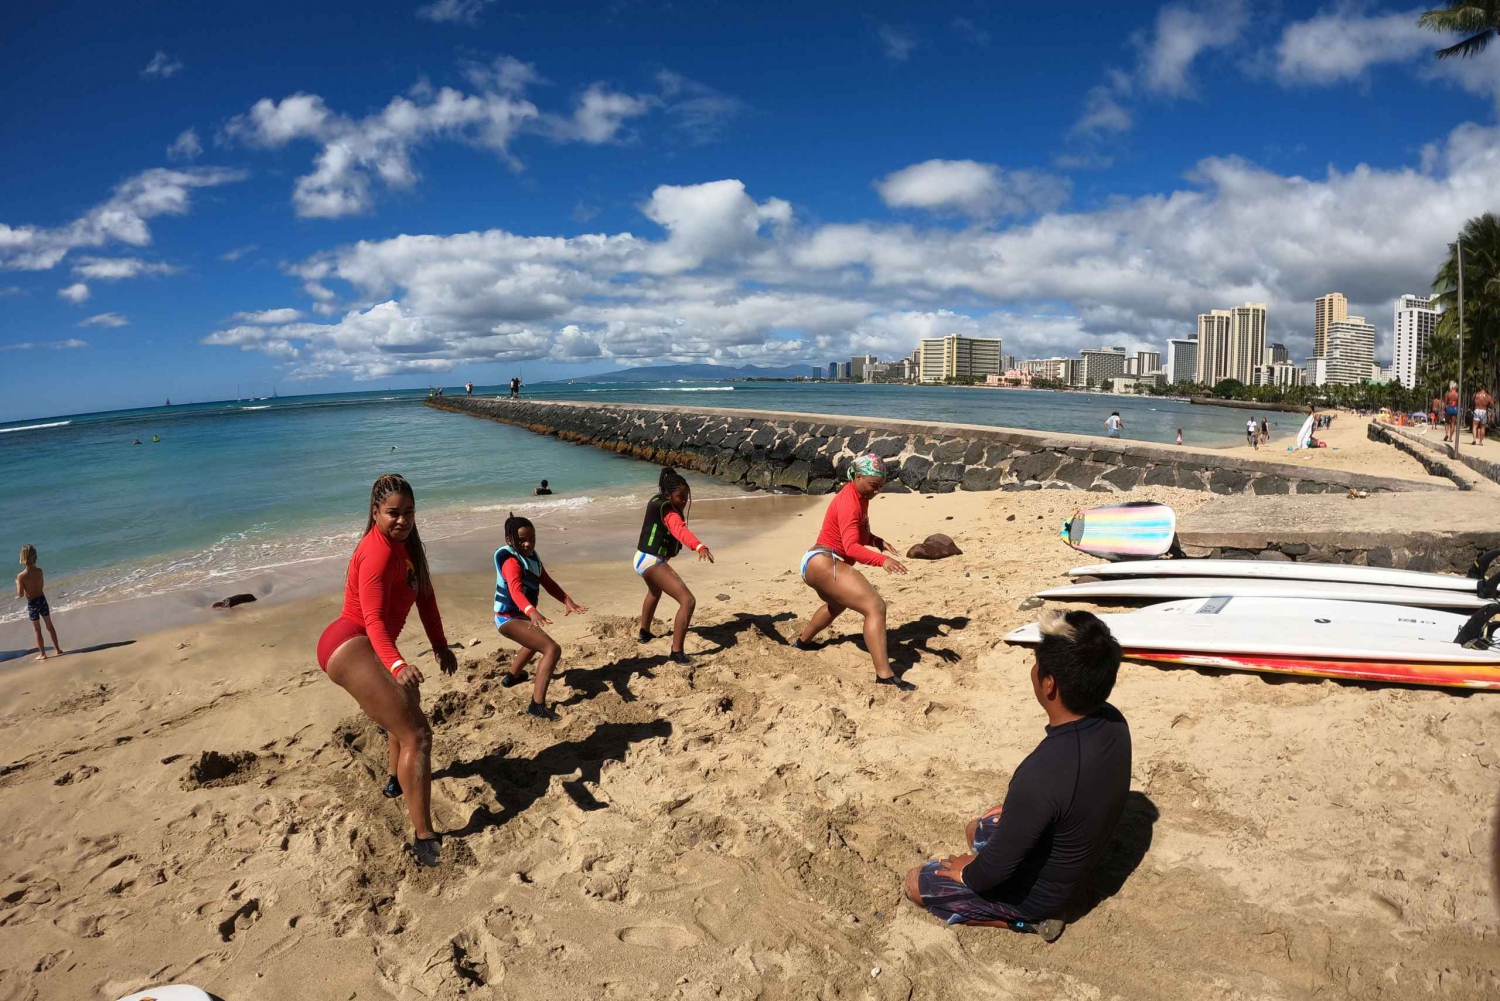 Family Surfing Lesson: 1 parent, 1 child under 13, & others